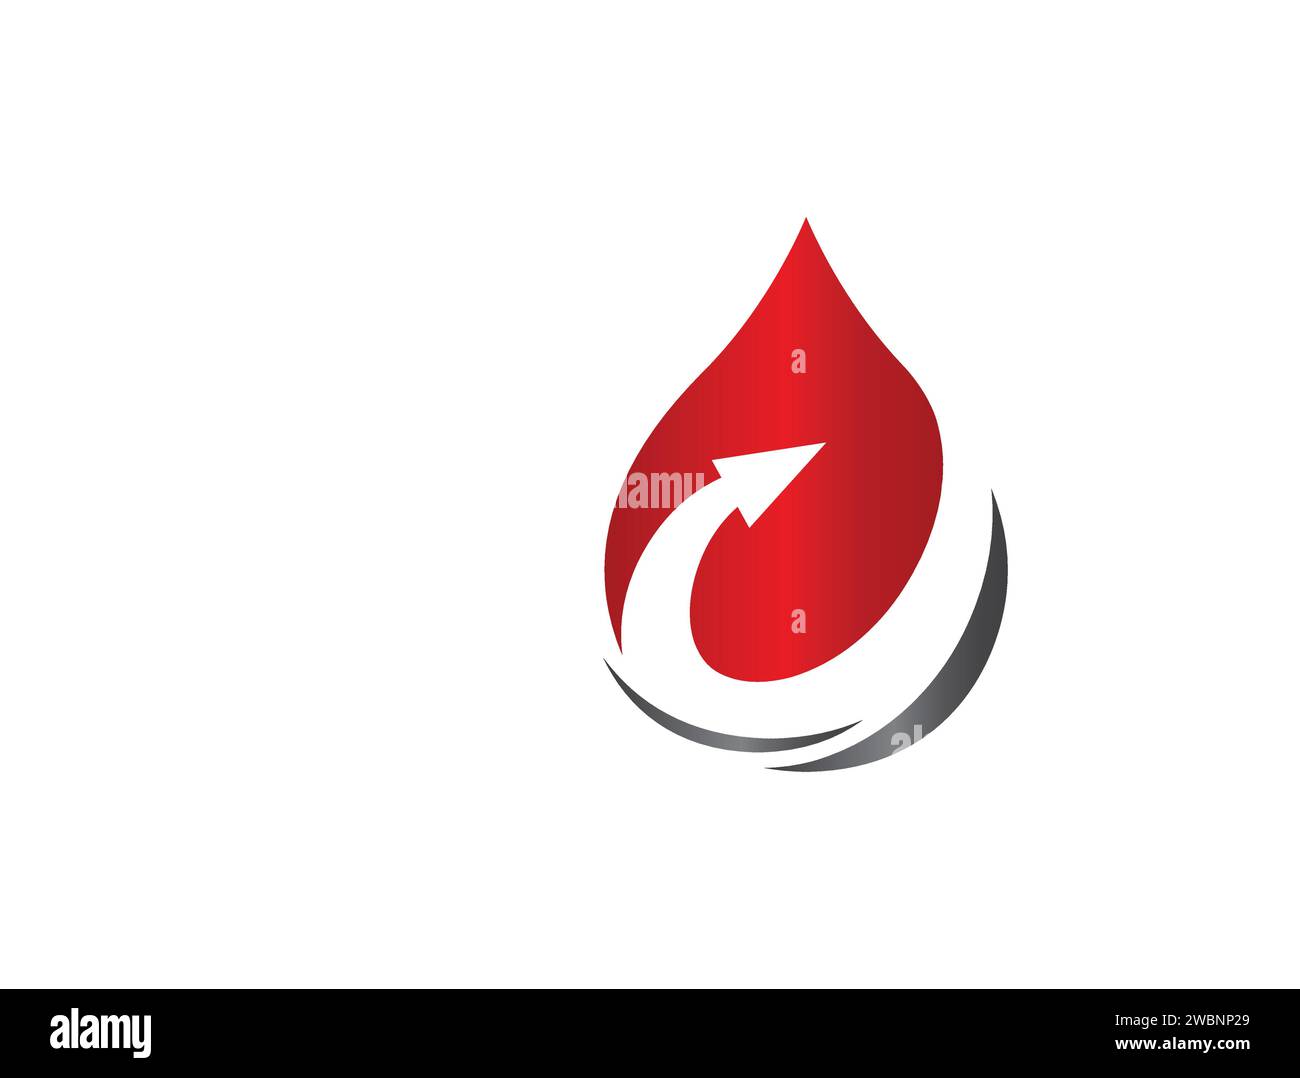 Oil and gas logo design vector template. Oil and gas mining company logo designs inspiration, perfect for company logo and signs Stock Vector